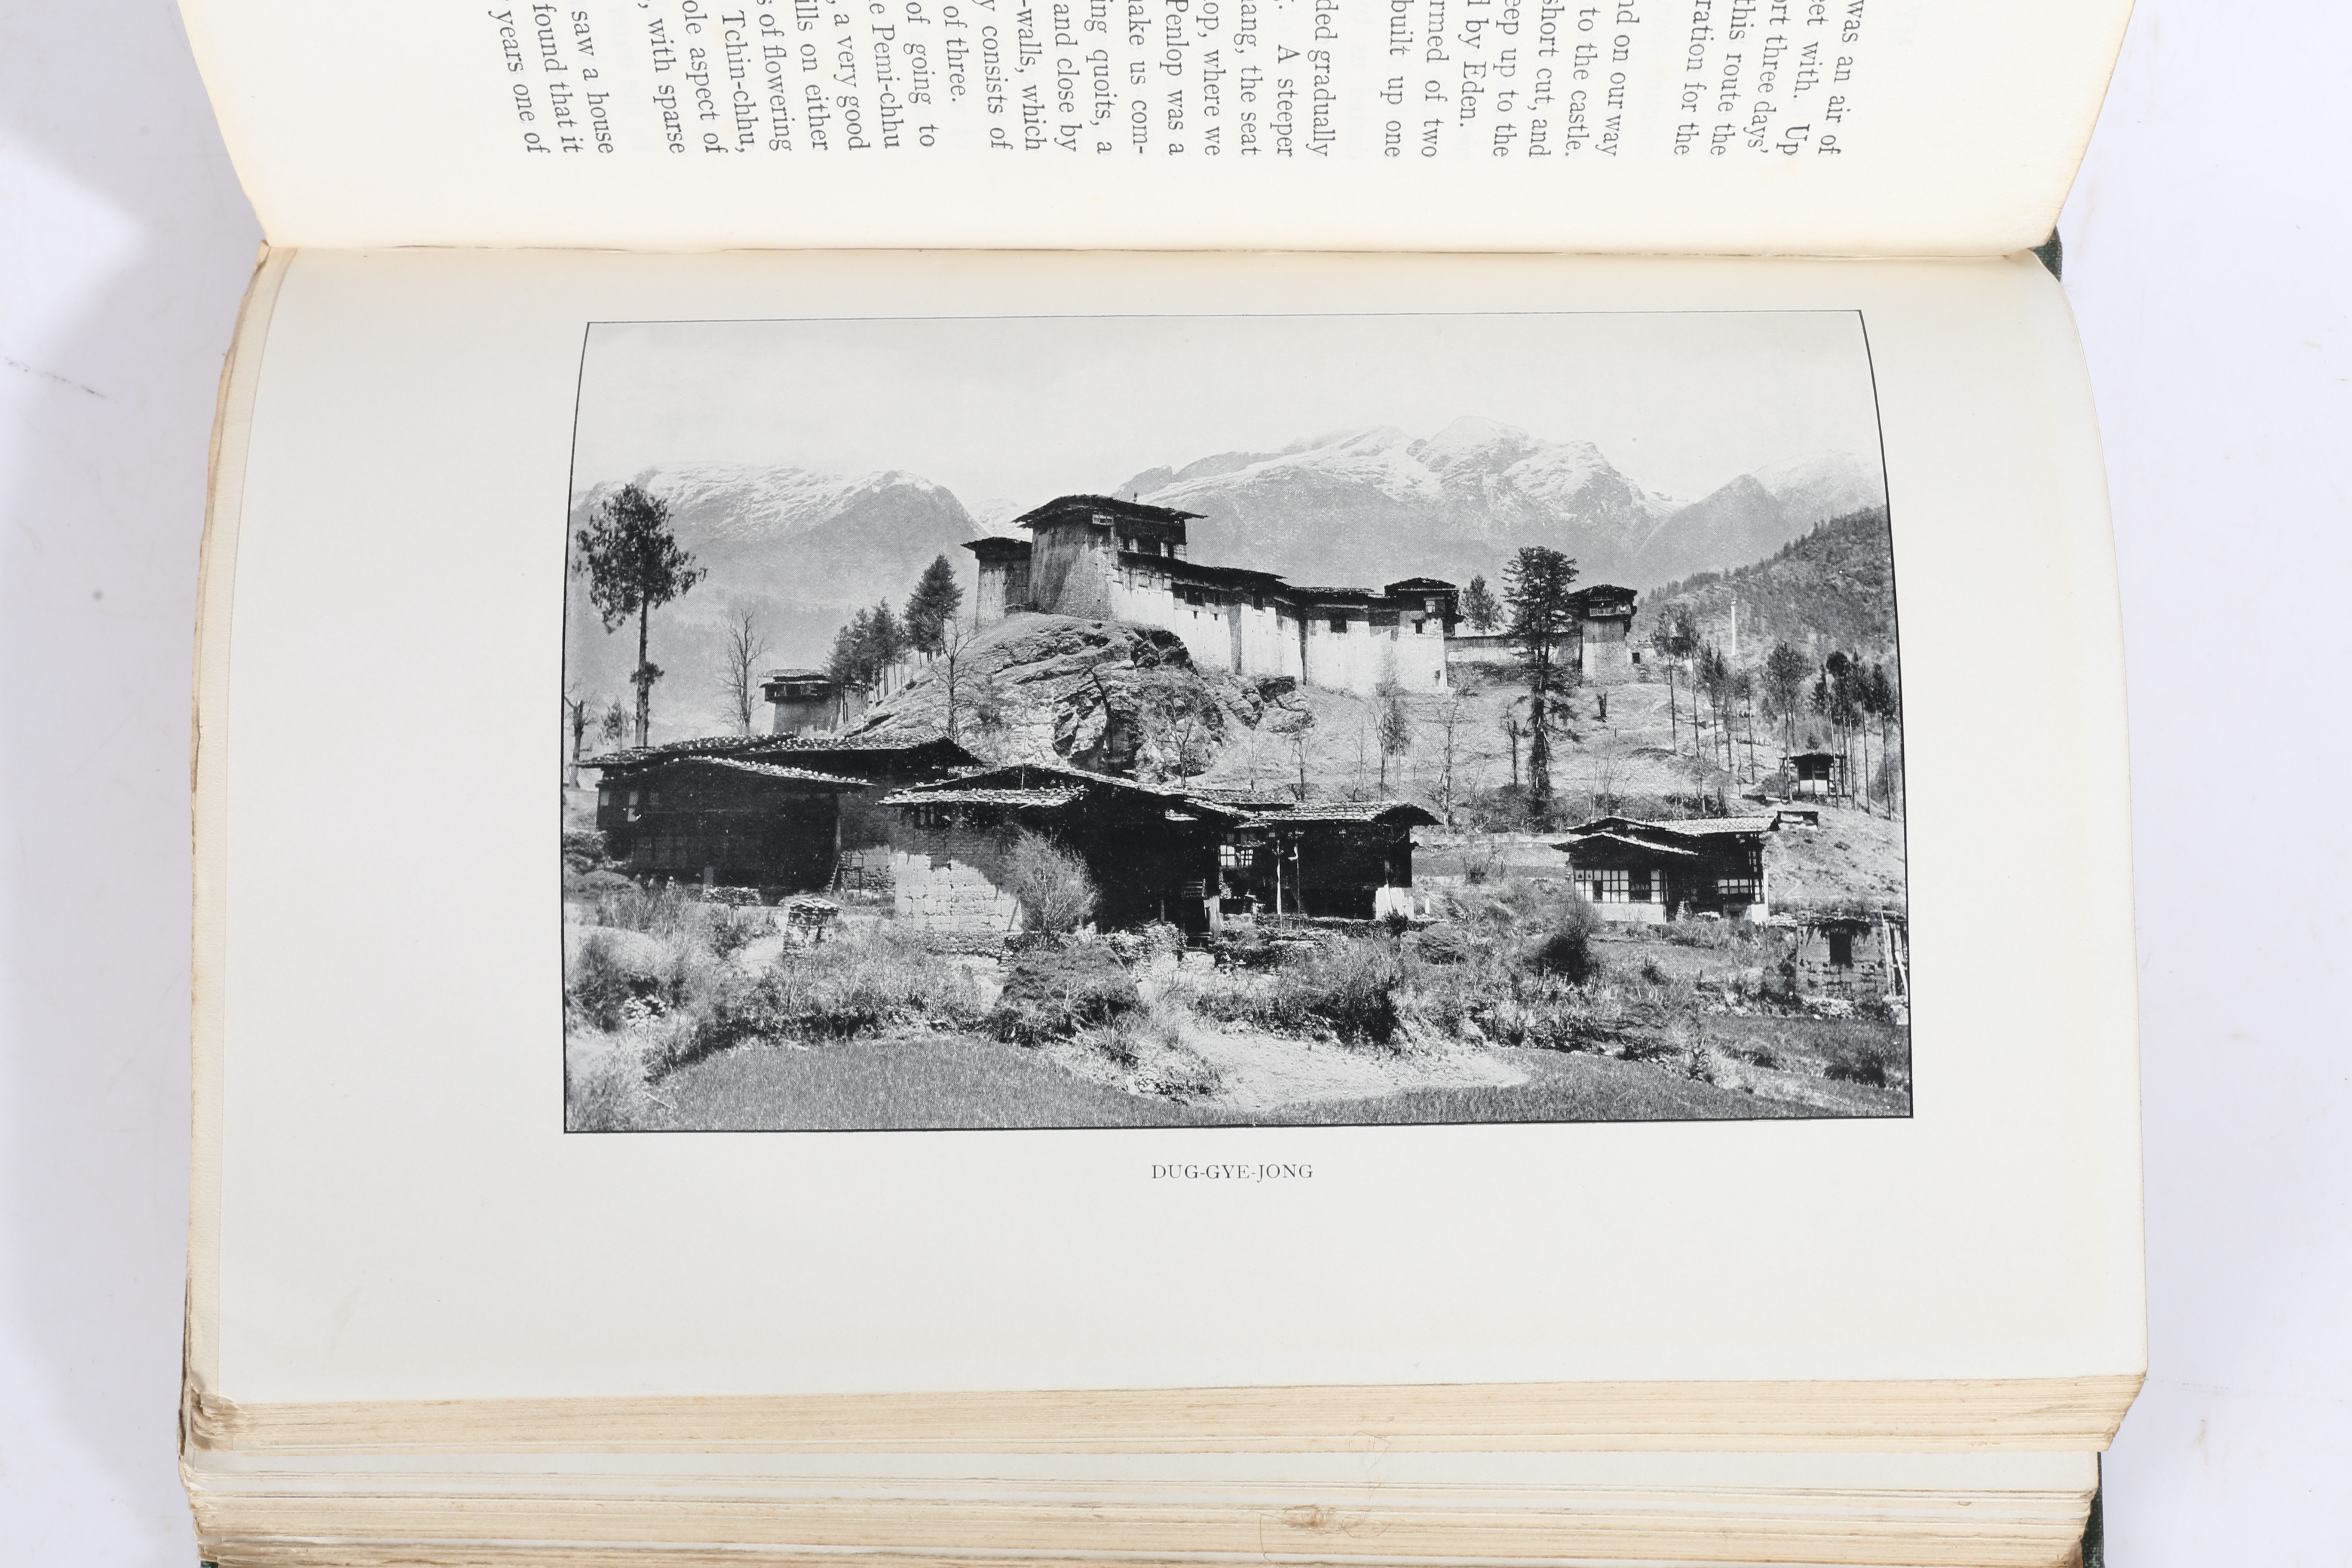 John Claude White "Sikhim & Bhutan Twenty-One Years on the North-East Frontier 1887-1908" First - Image 2 of 4